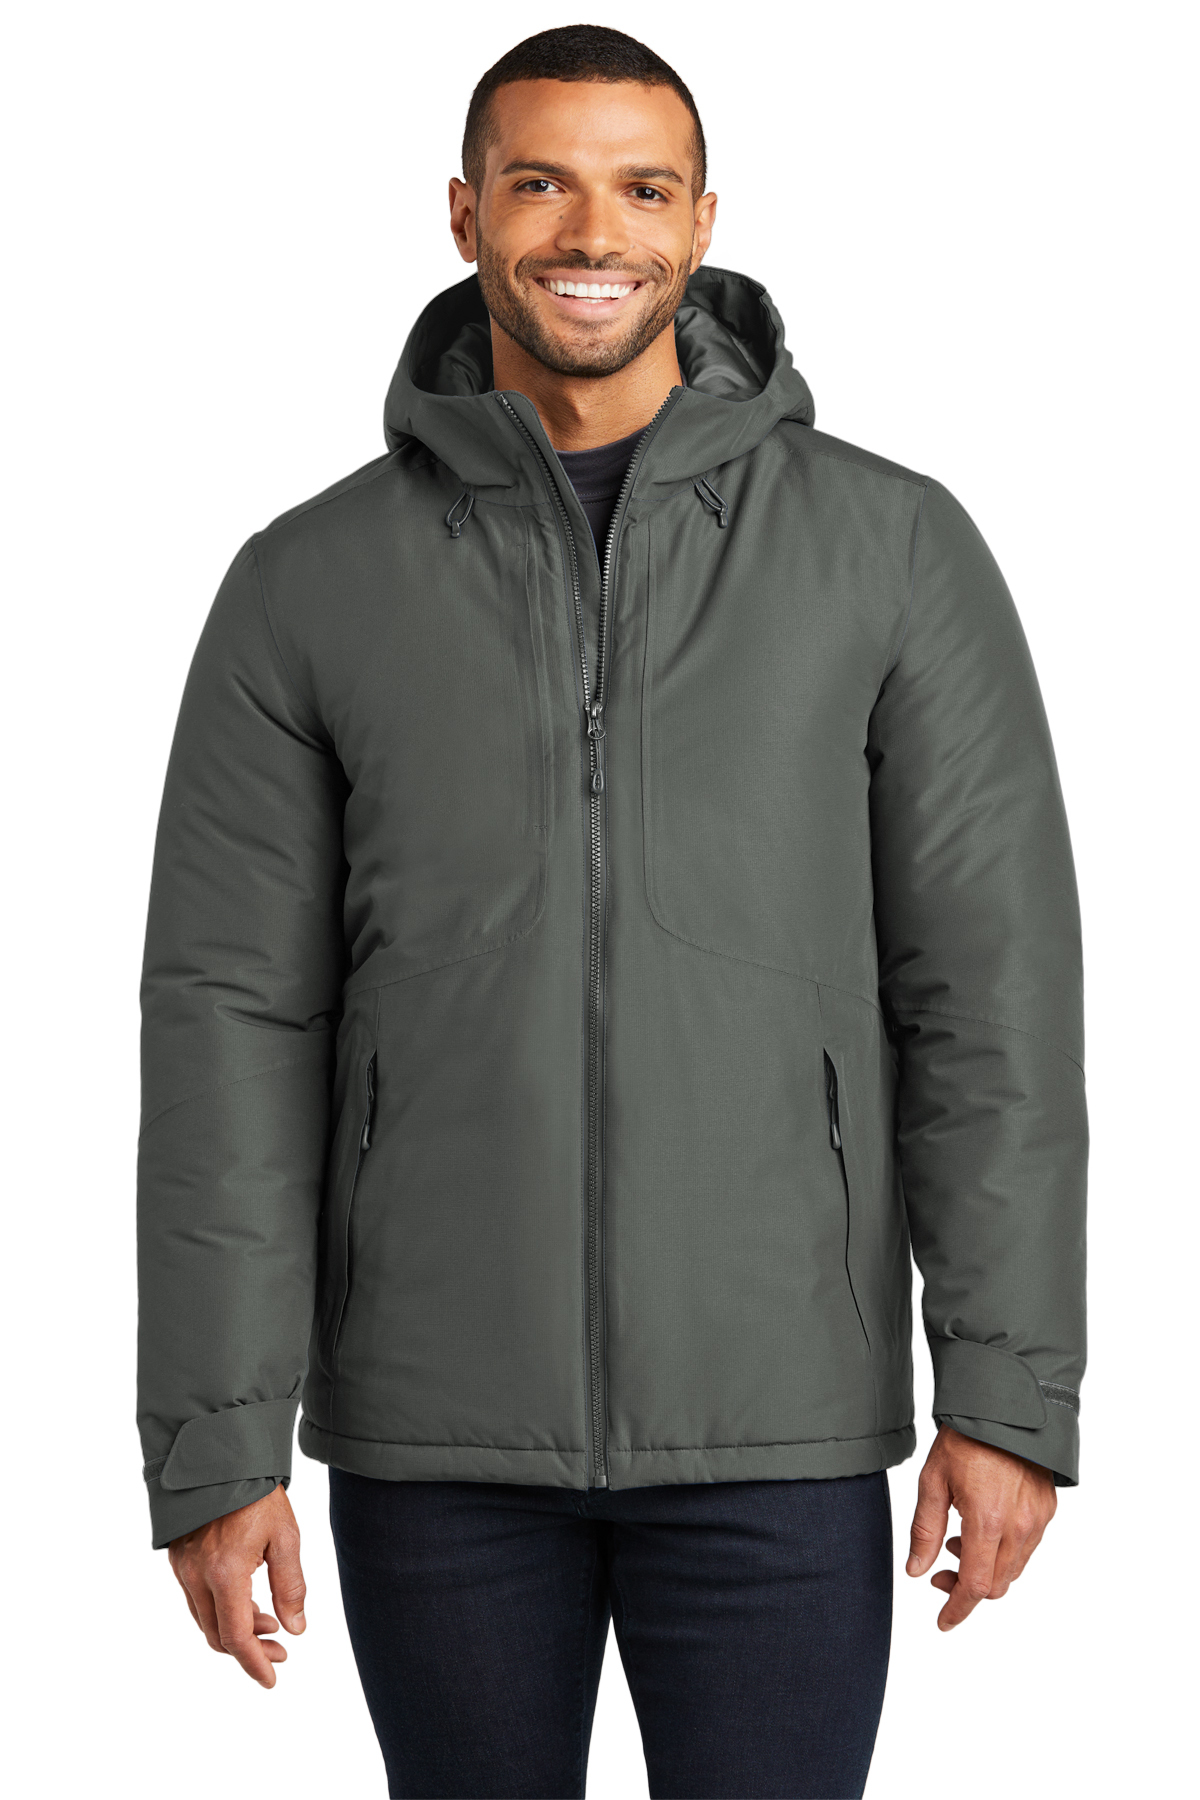 Port Authority Venture Waterproof Insulated Jacket, Product